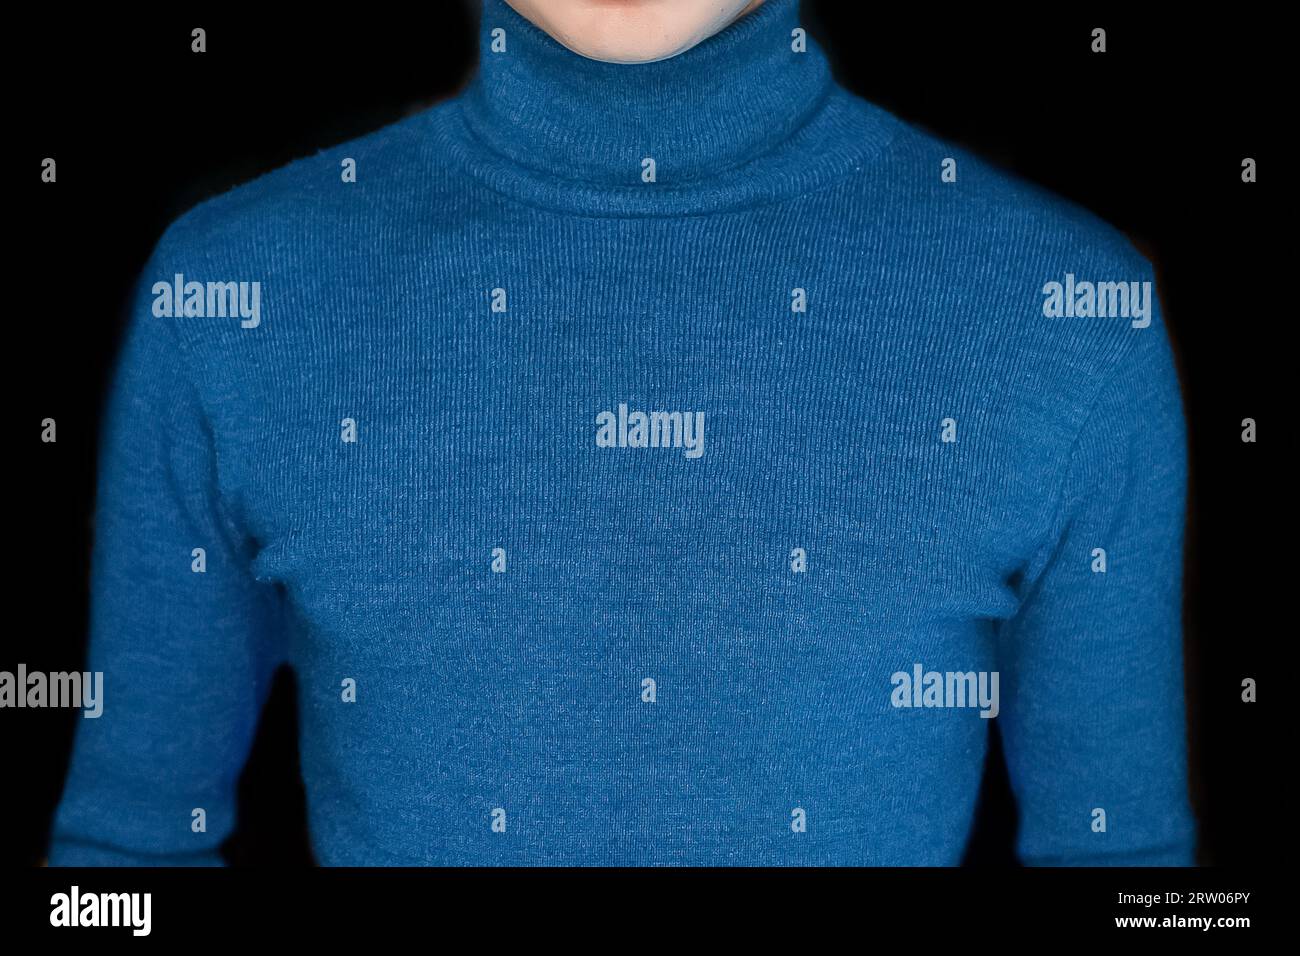 Skinny guy in blue turtleneck men's style of clothing on the black background, close up. Stock Photo